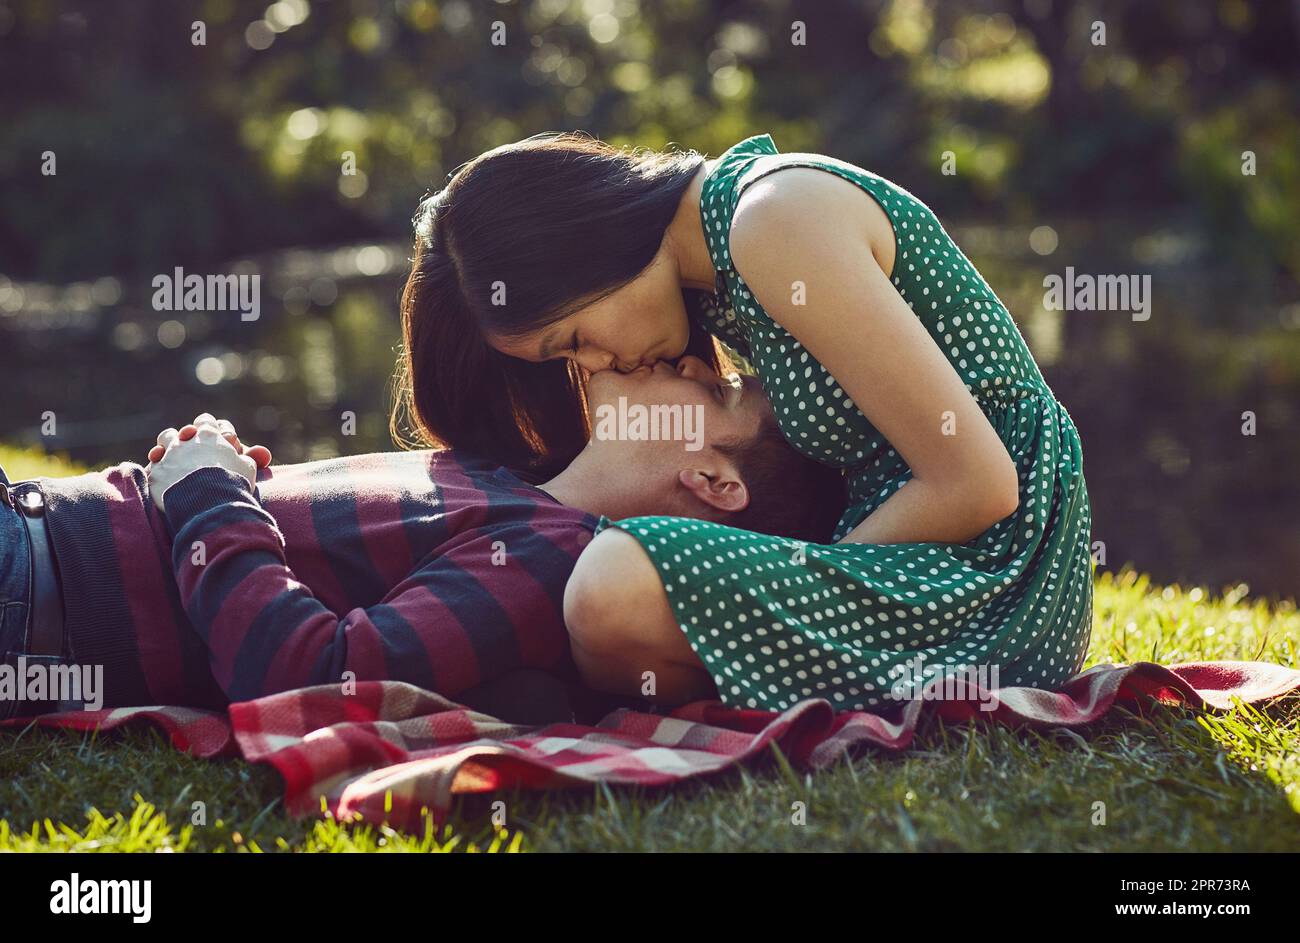 Nothing says romance like a picnic in the park. Shot of an affectionate young couple relaxing together on a picnic blanket in the park. Stock Photo